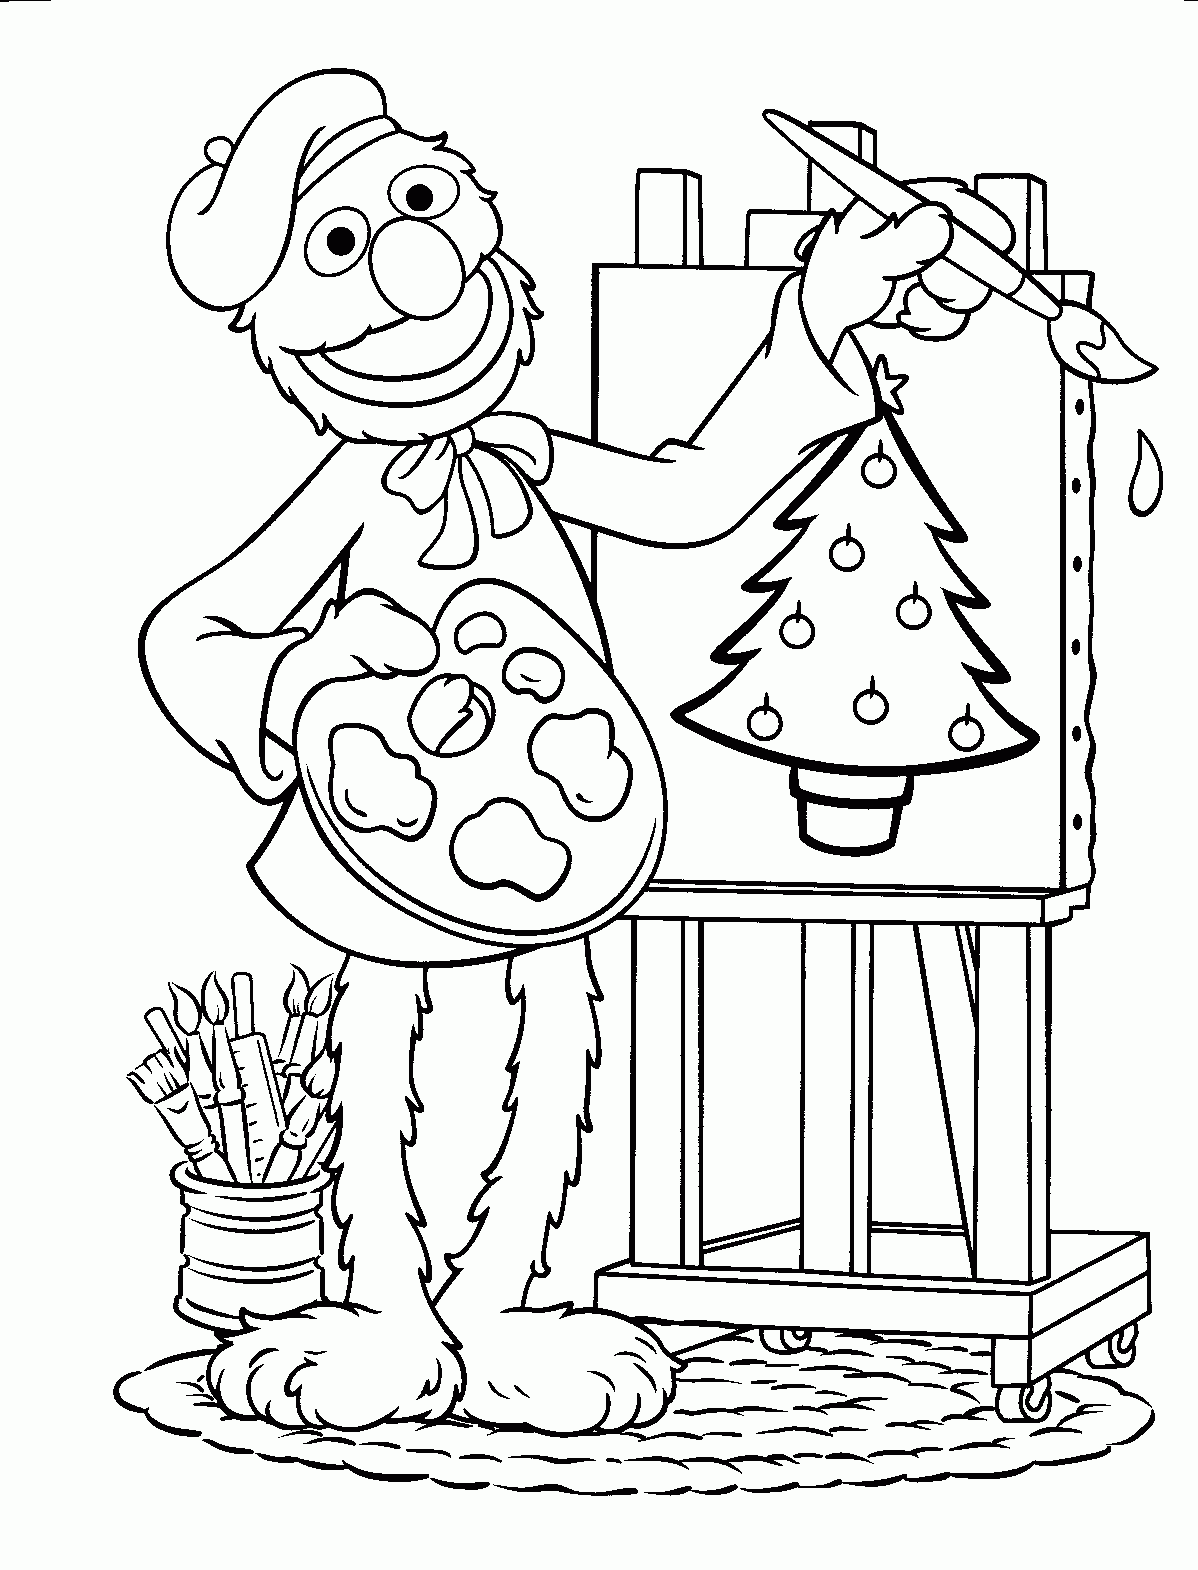 43 Collections of Free Printable Sesame Street Coloring Pages ...